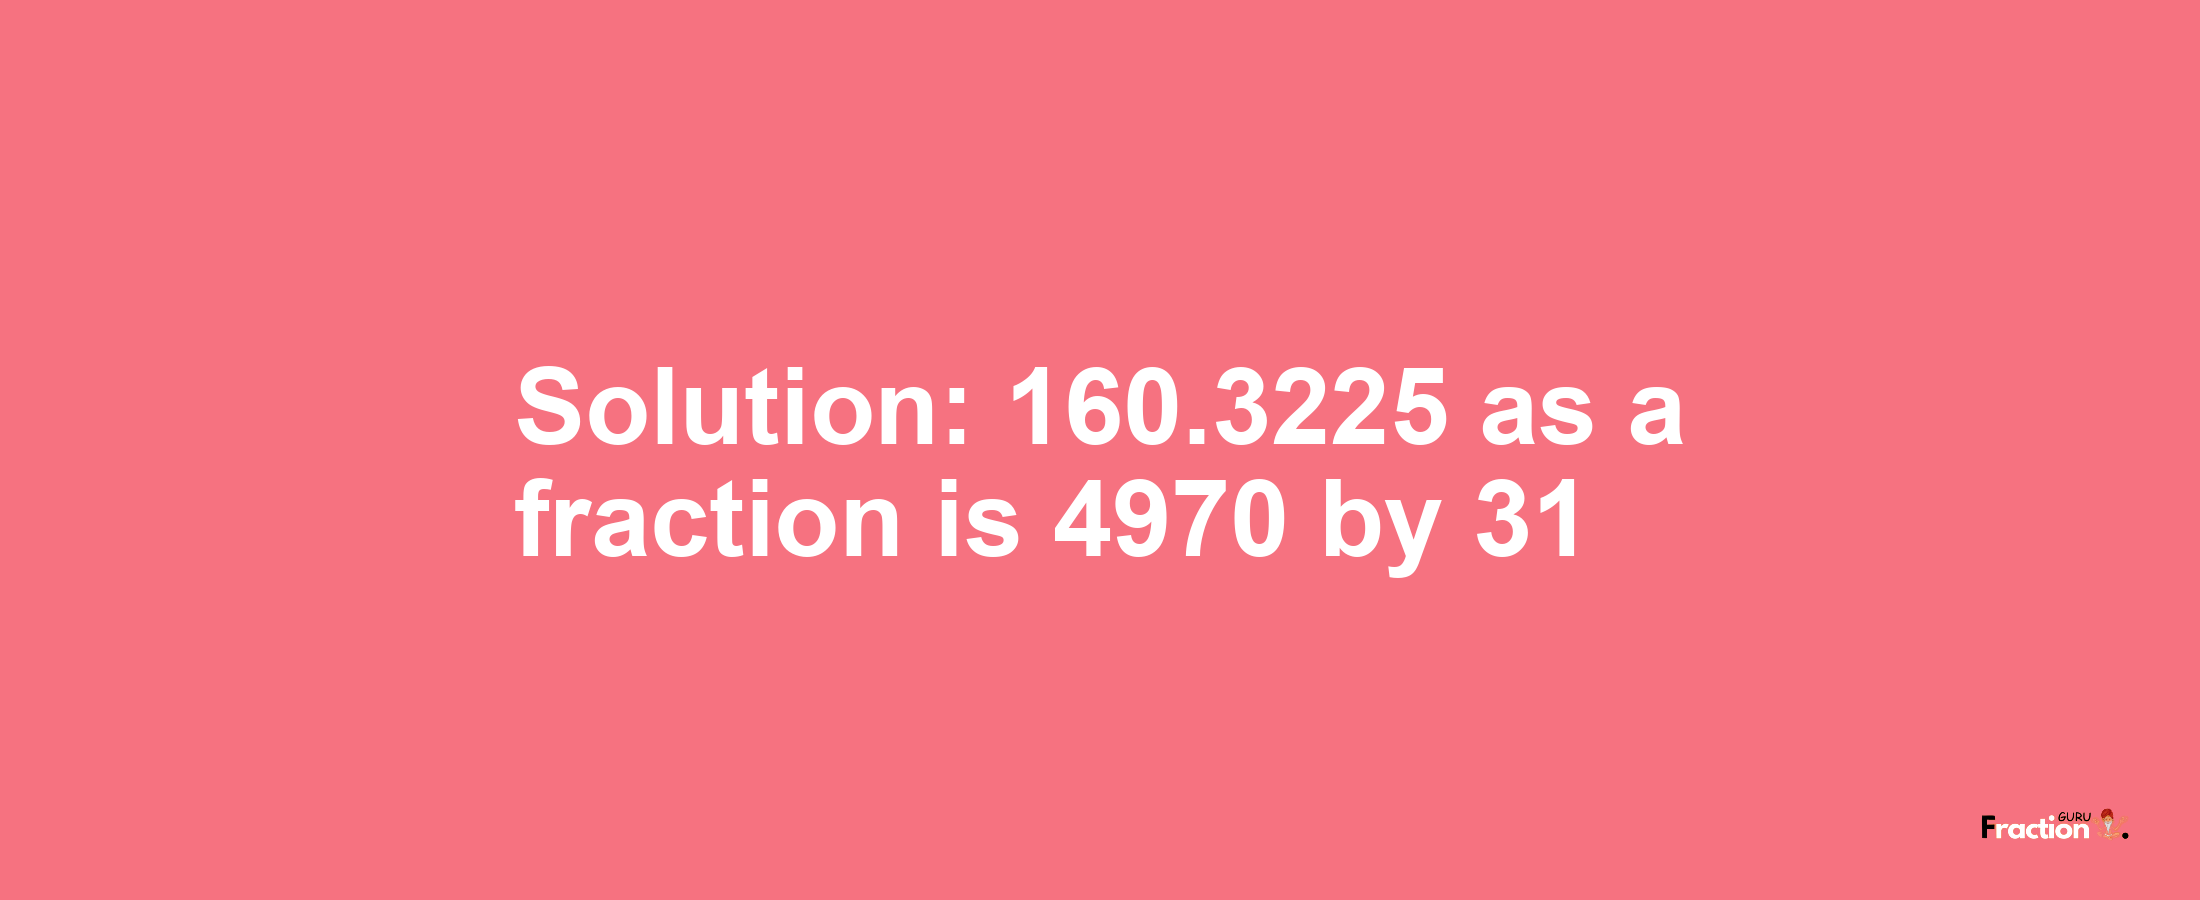 Solution:160.3225 as a fraction is 4970/31